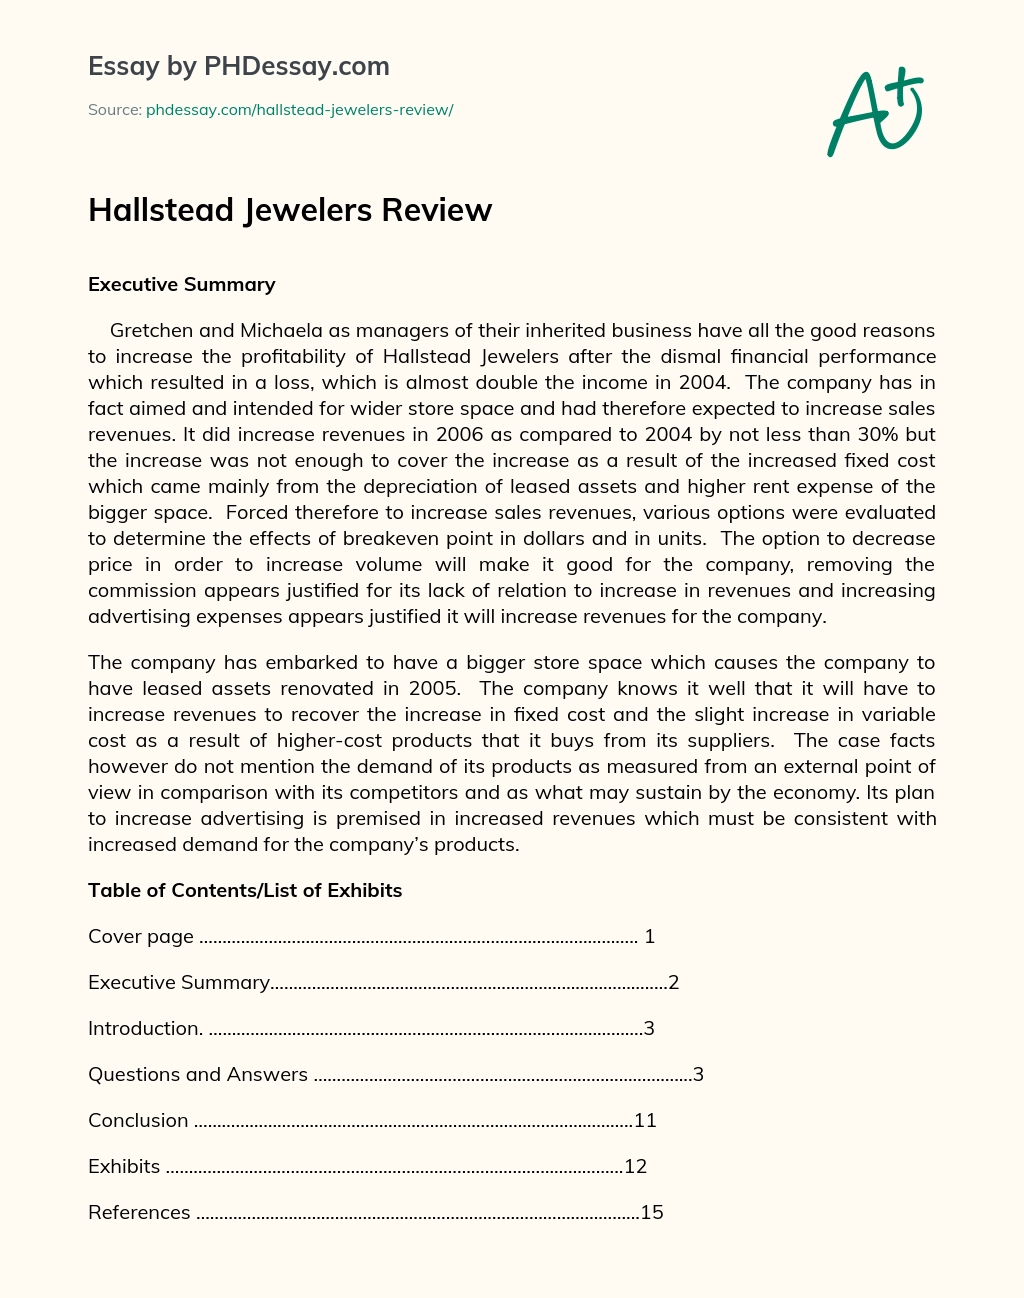 Hallstead Jewelers Review essay